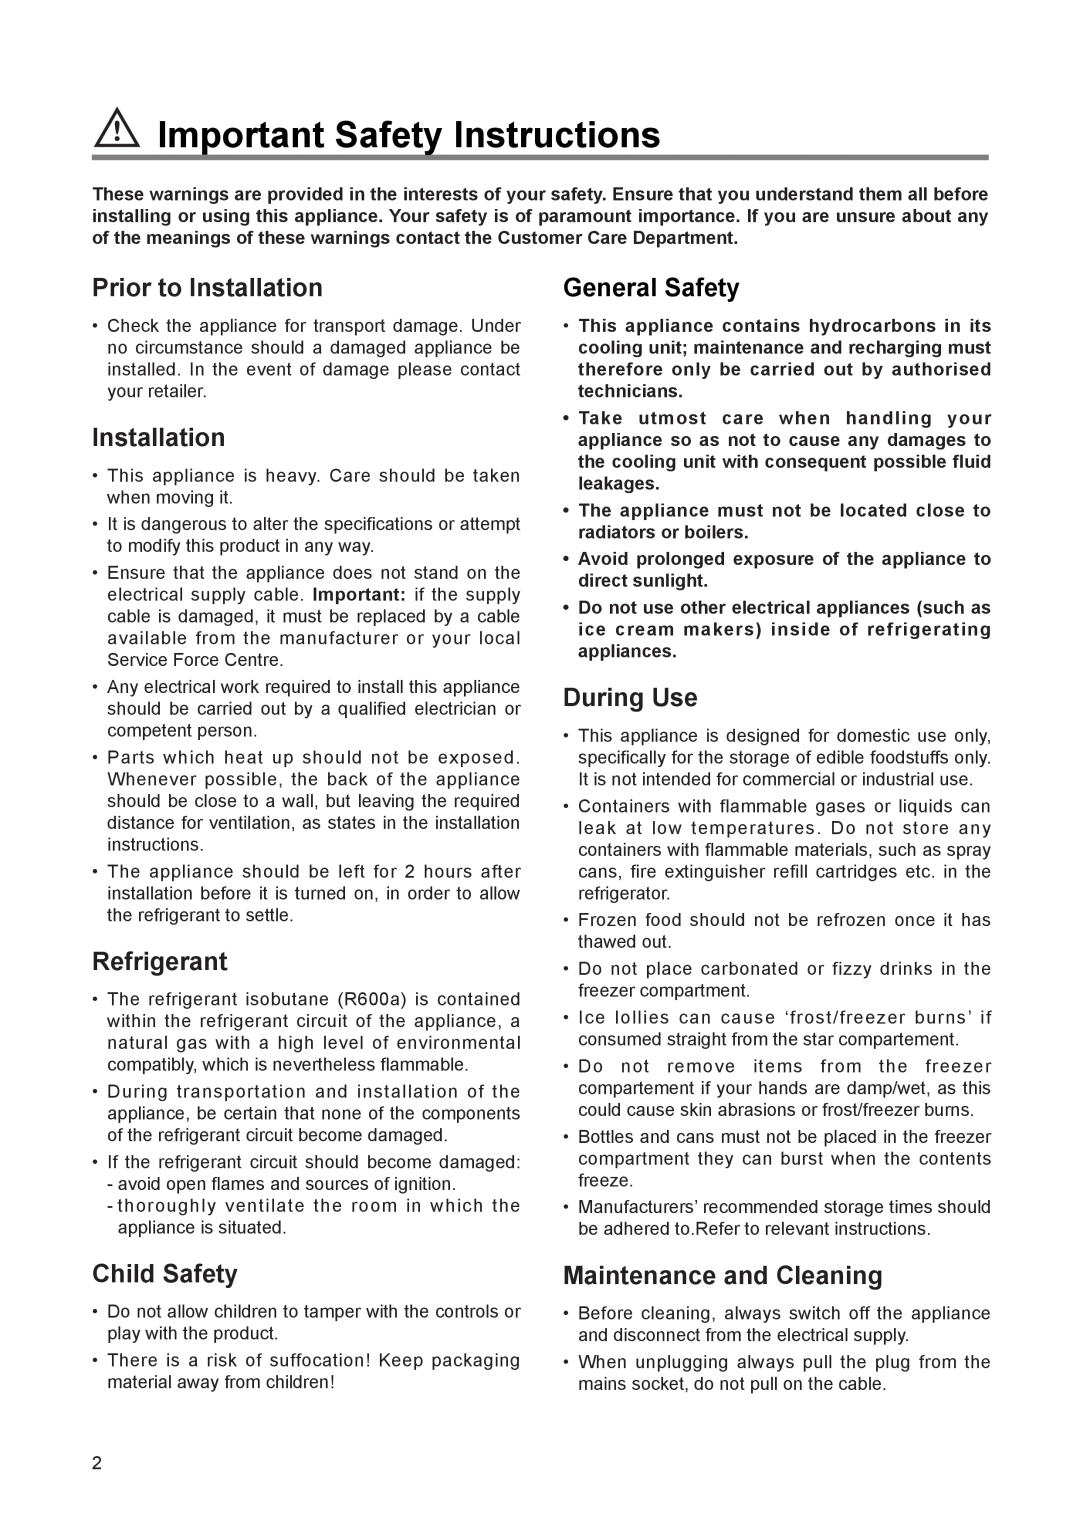 Zanussi ZI 9224 manual Important Safety Instructions, Prior to Installation, Refrigerant, General Safety, During Use 